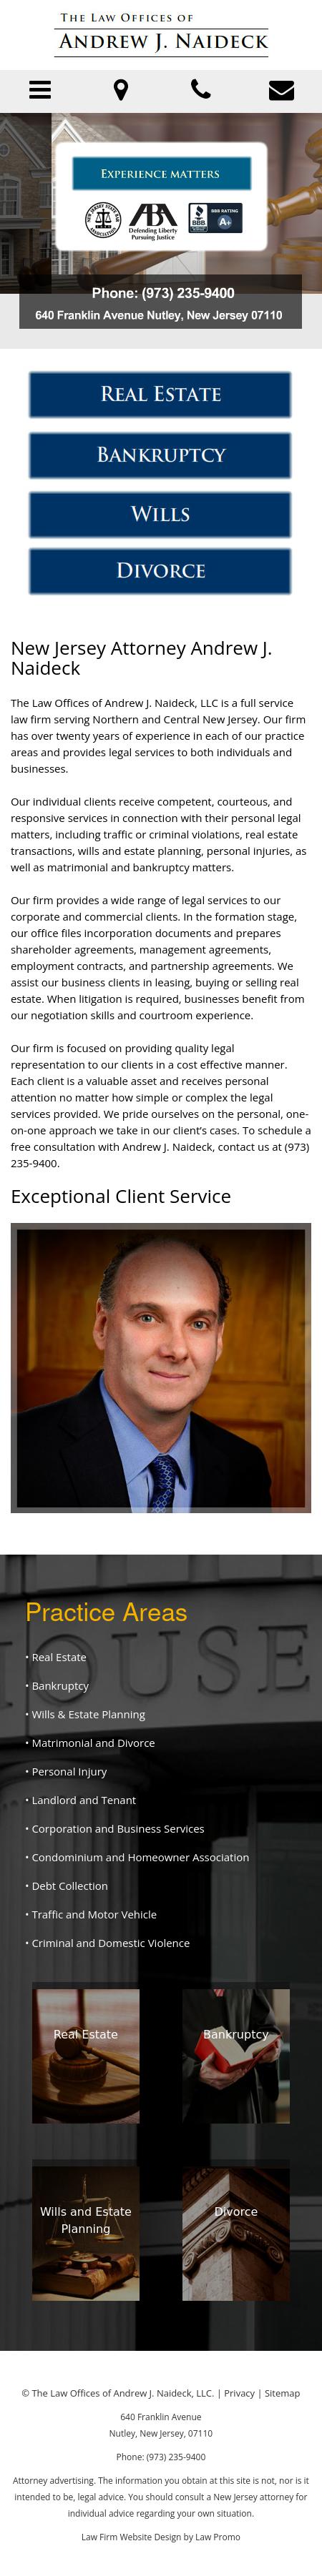 Law Offices of Andrew J. Naideck - Nutley NJ Lawyers